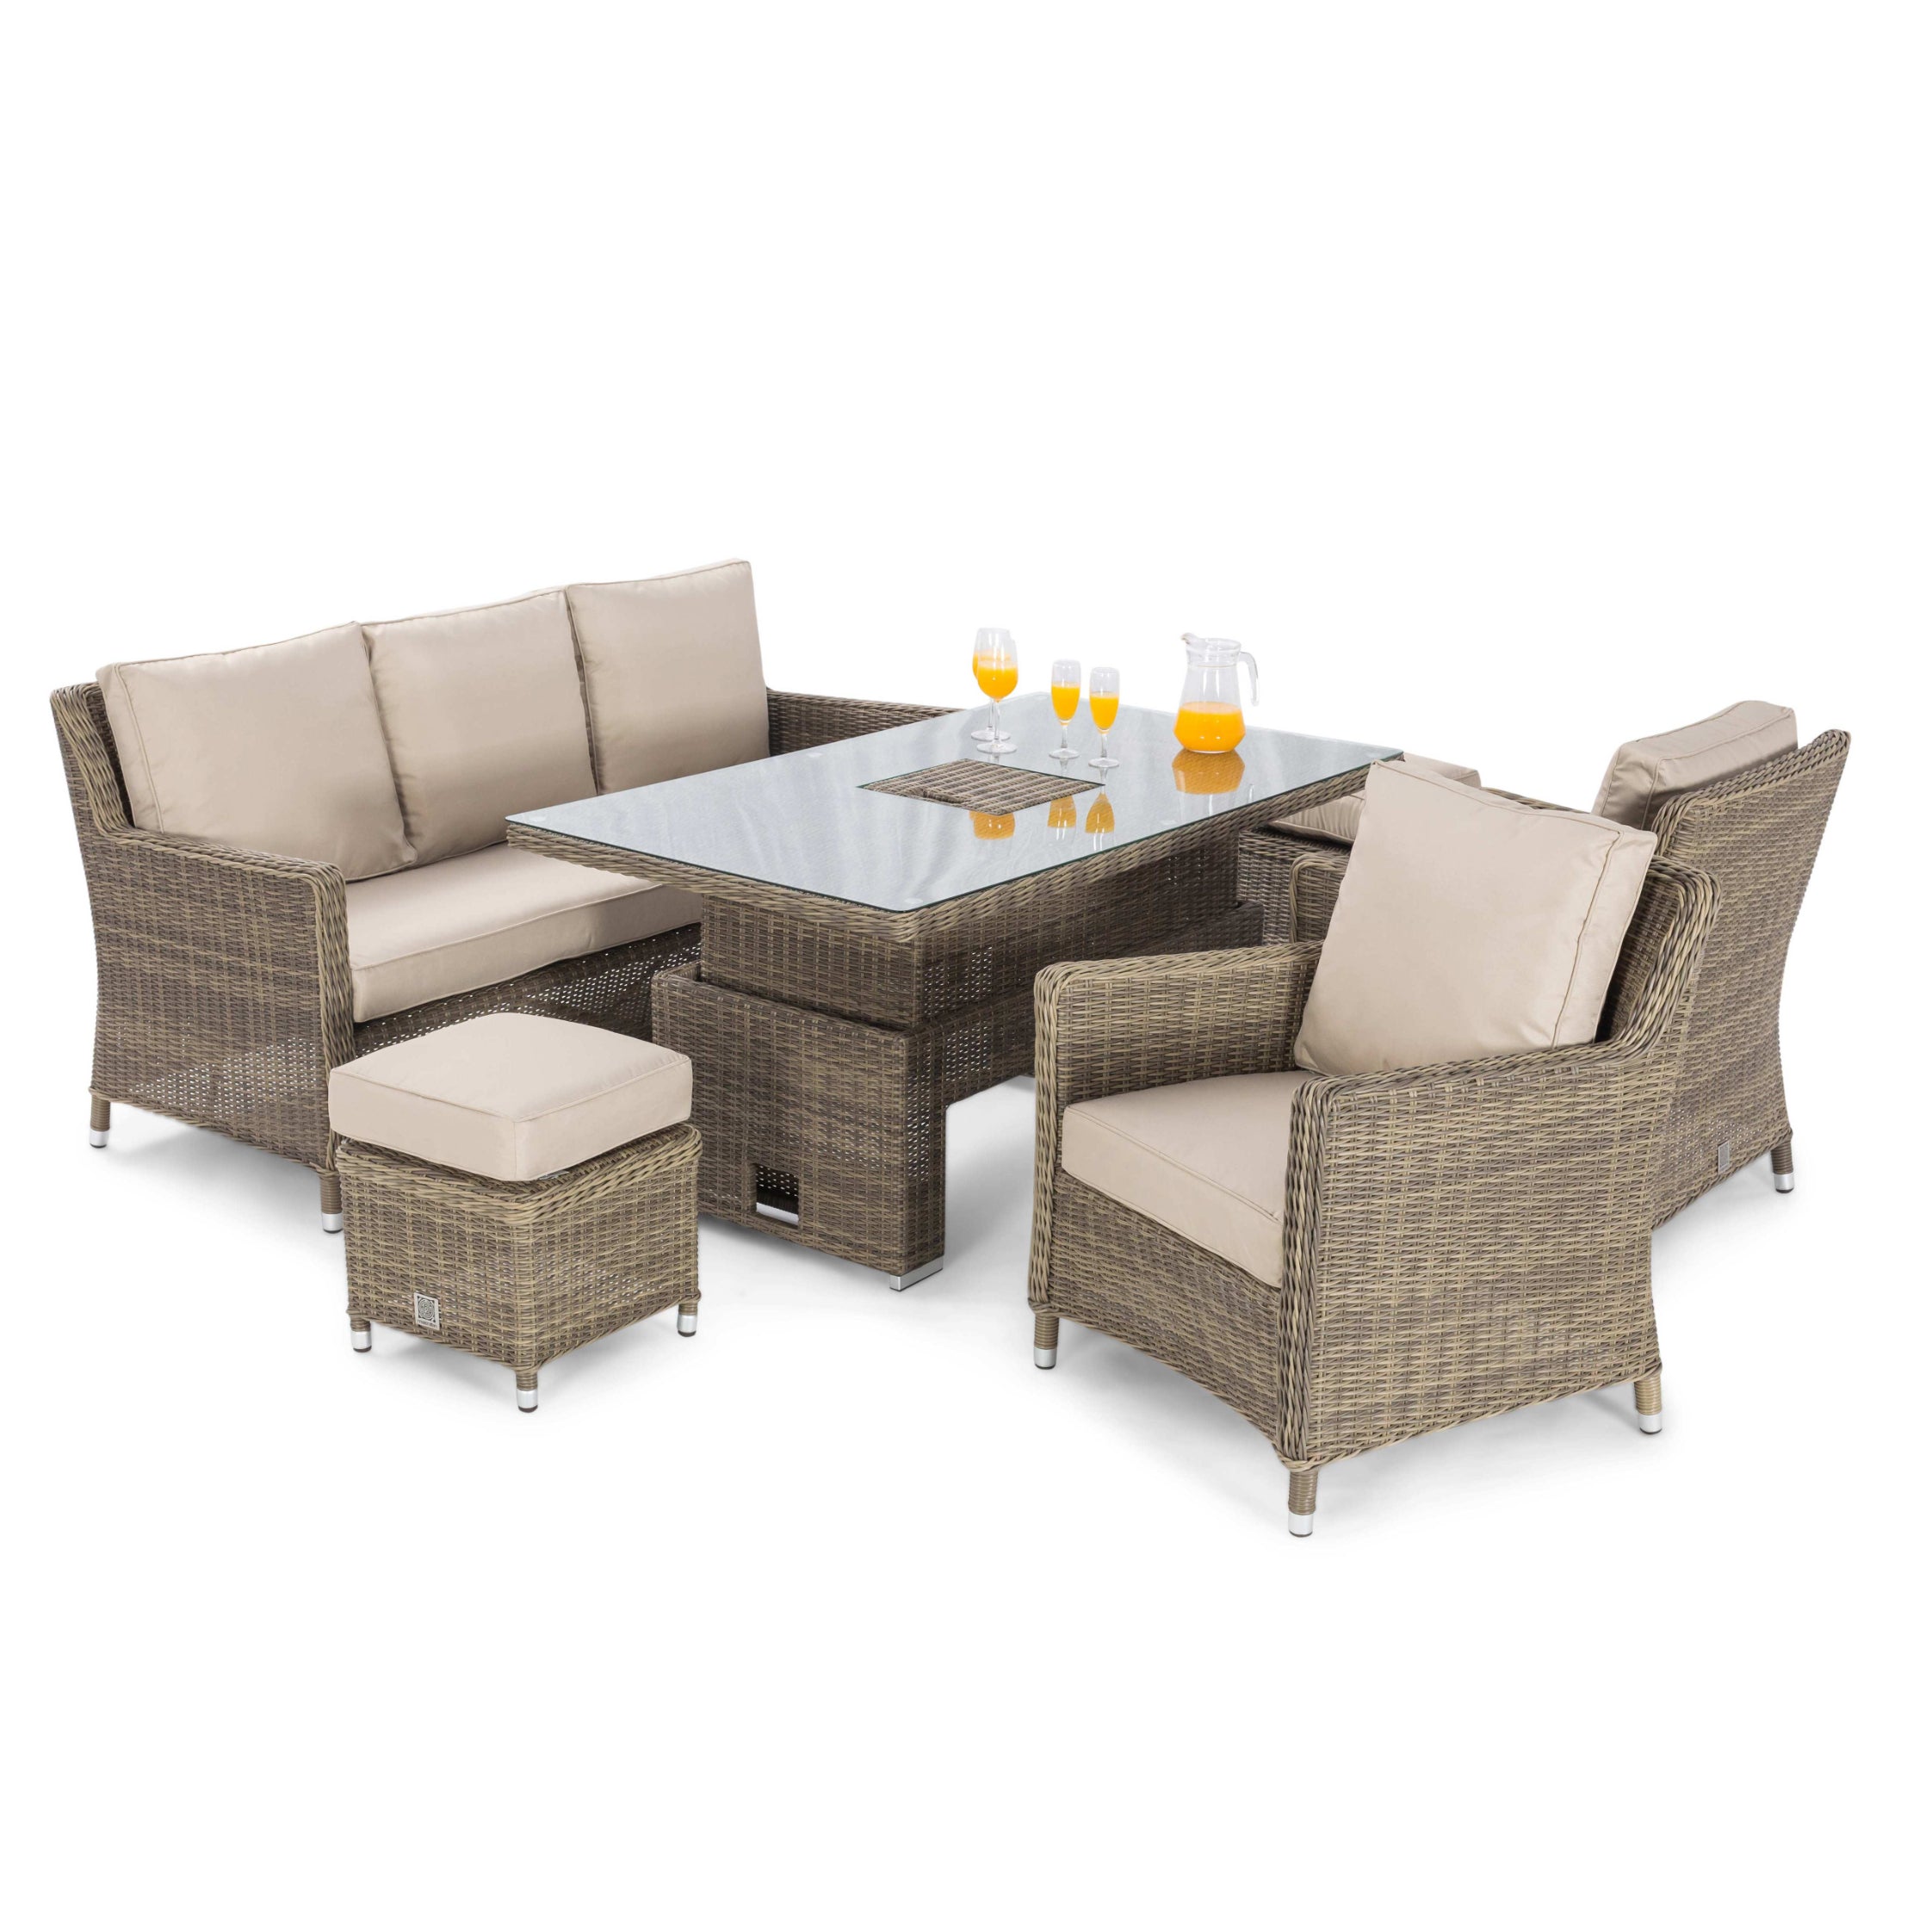 Natural coloured rattan 3 seat sofa dining set with two armchairs, two stools and a rectangle ice bucket rising table.